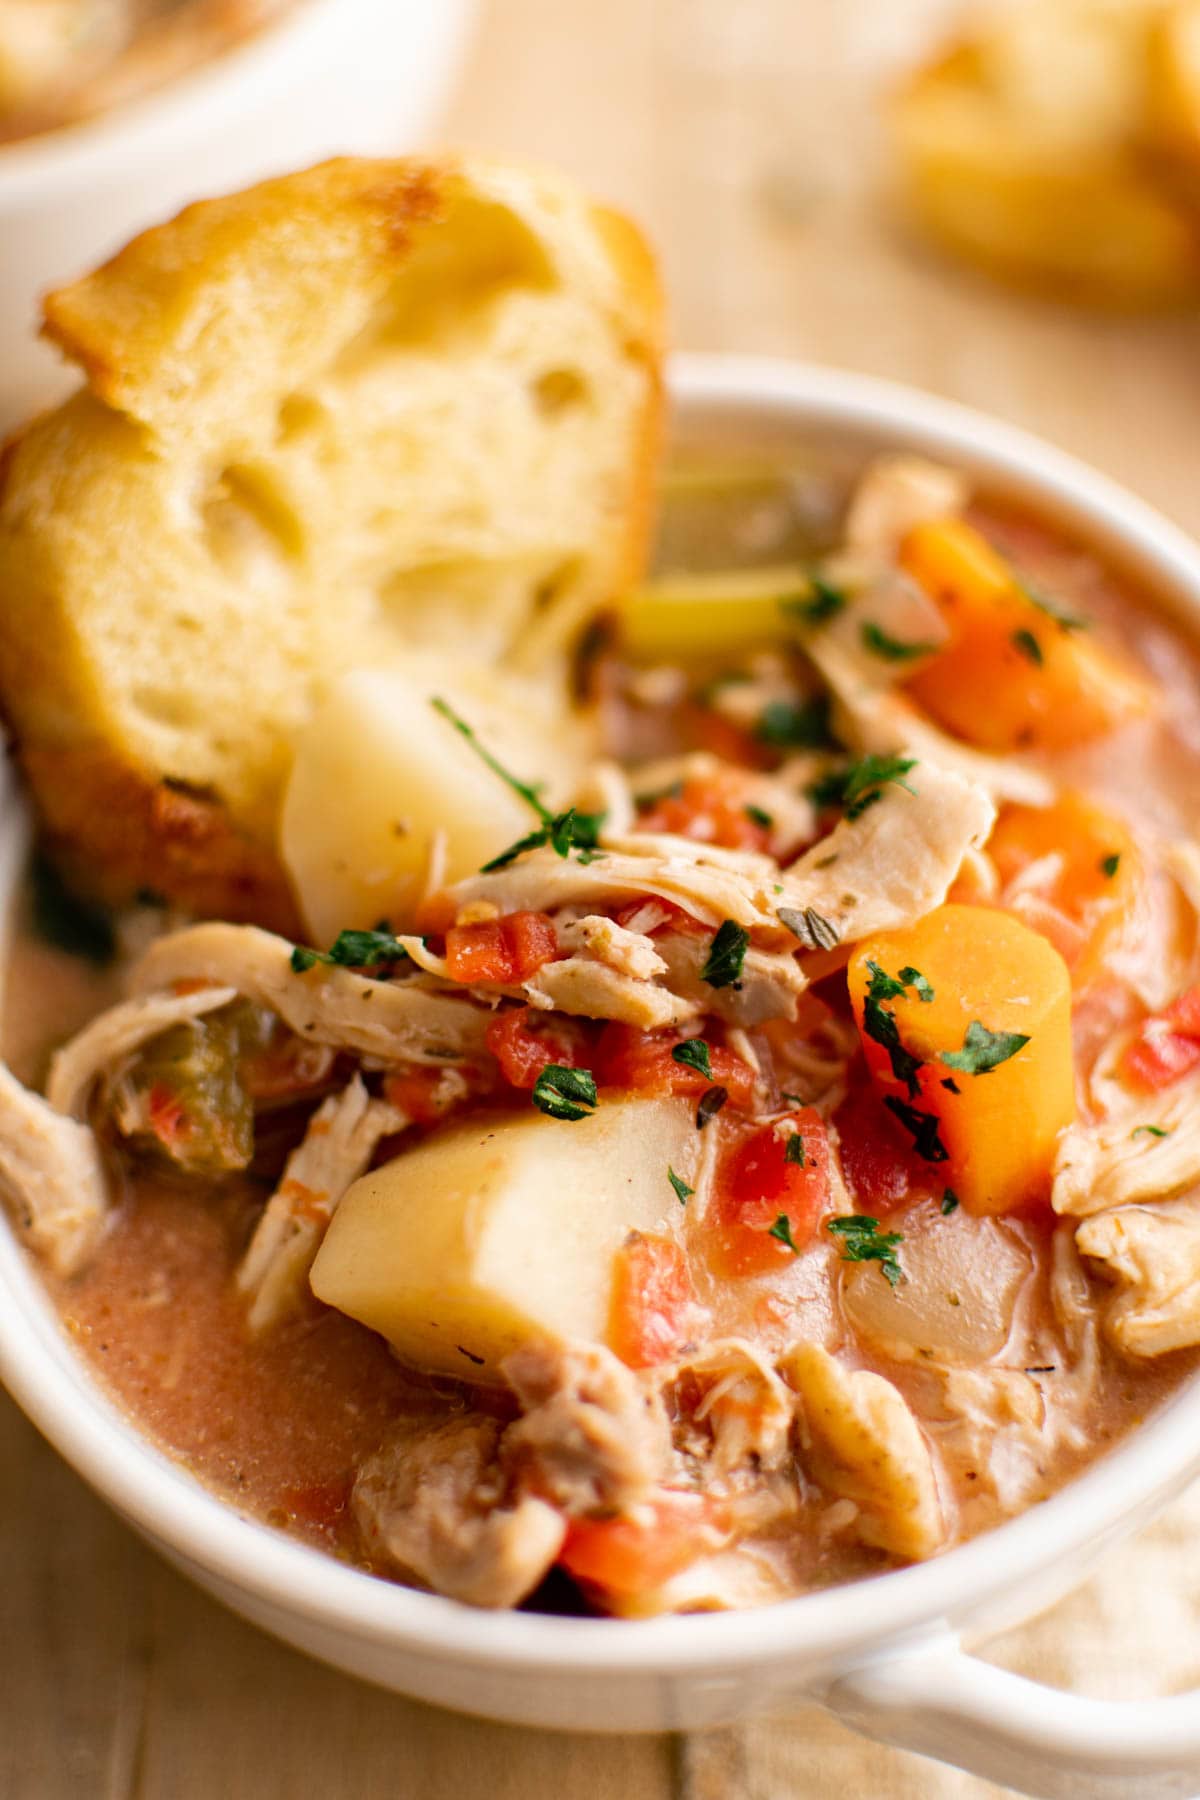 Bowl of chicken stew garnished with parsley and a piece of bread.